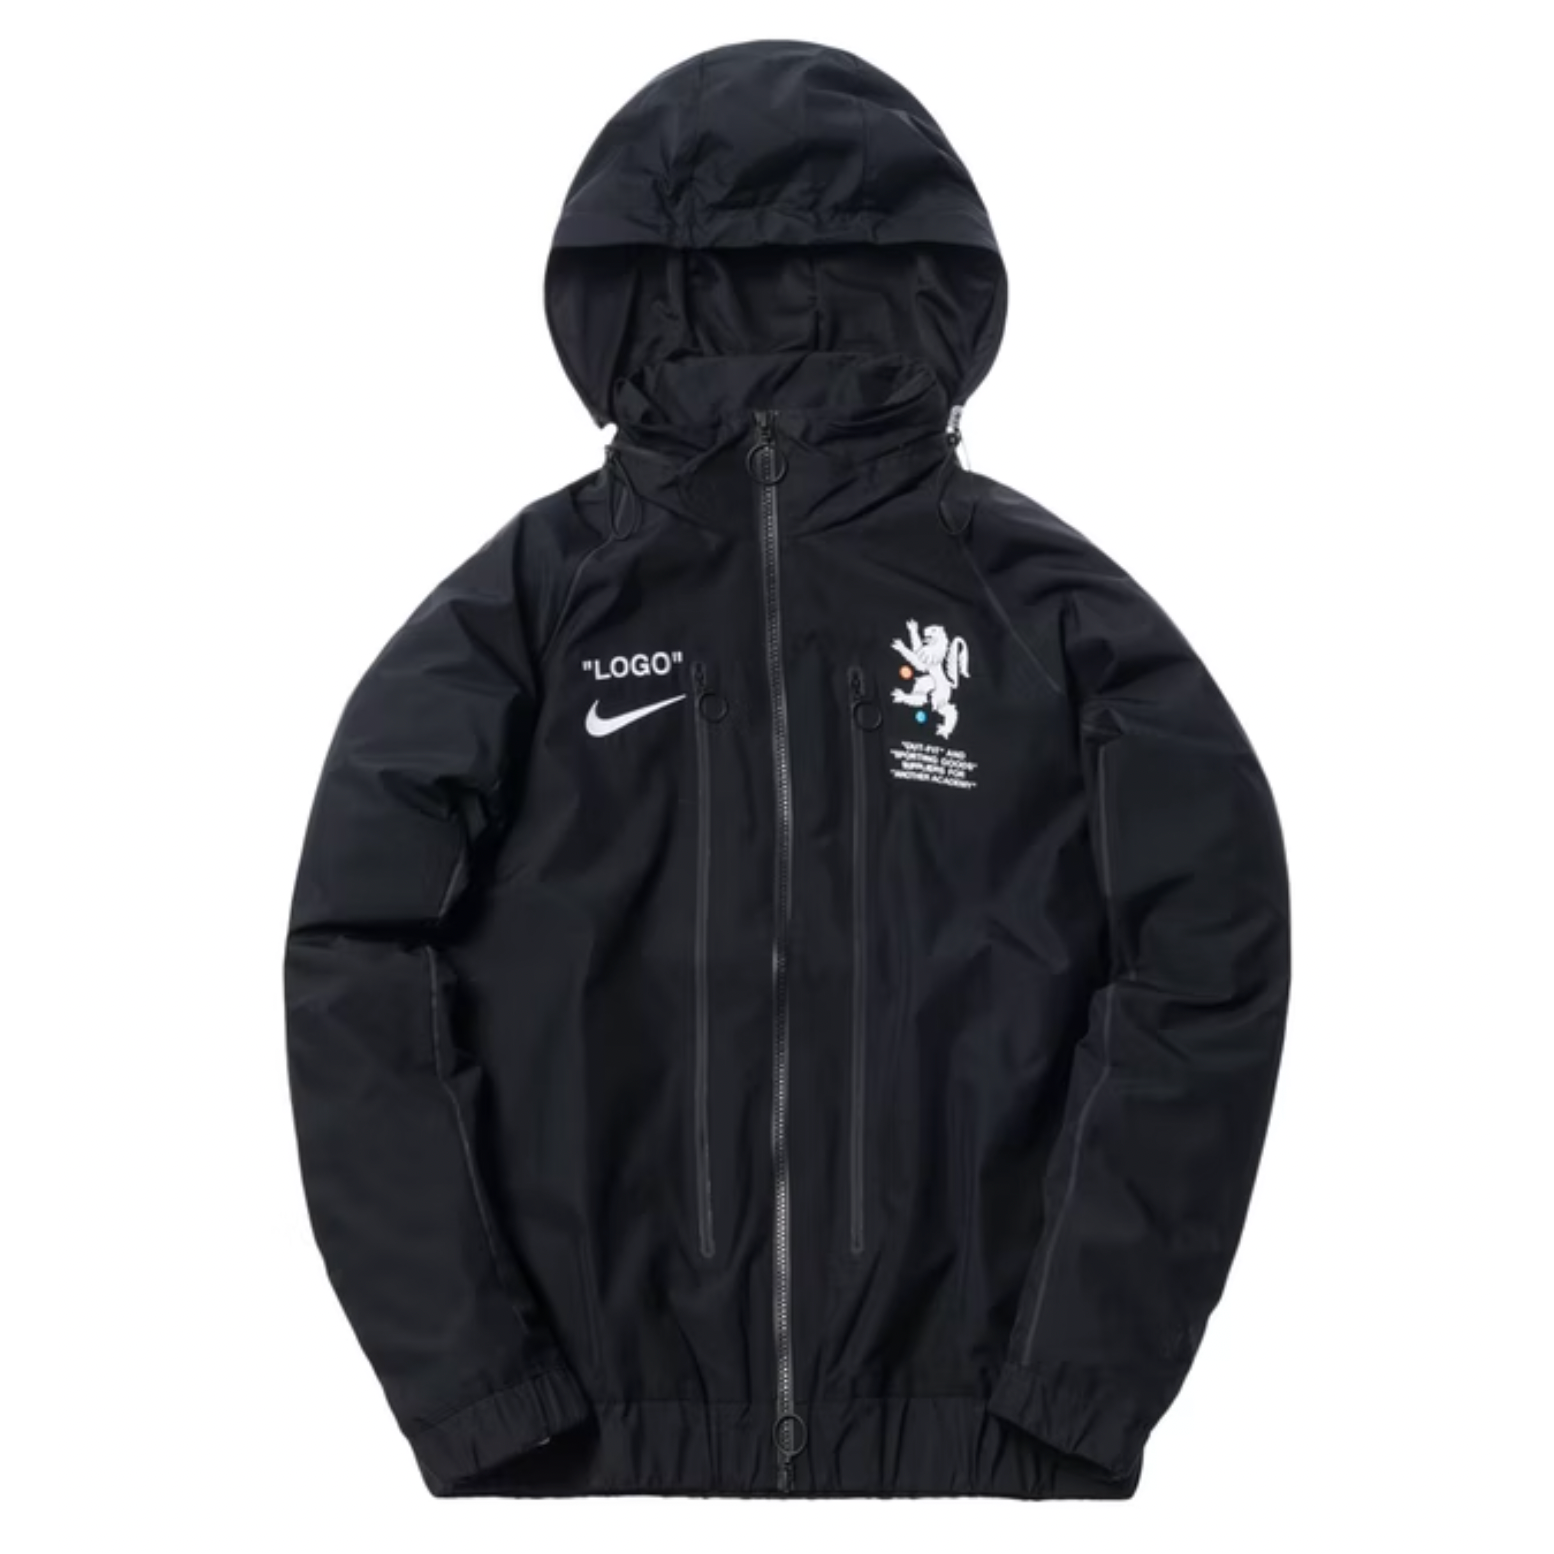 Nike x Off White Mecurial NRG X Track Jacket Black from Nike